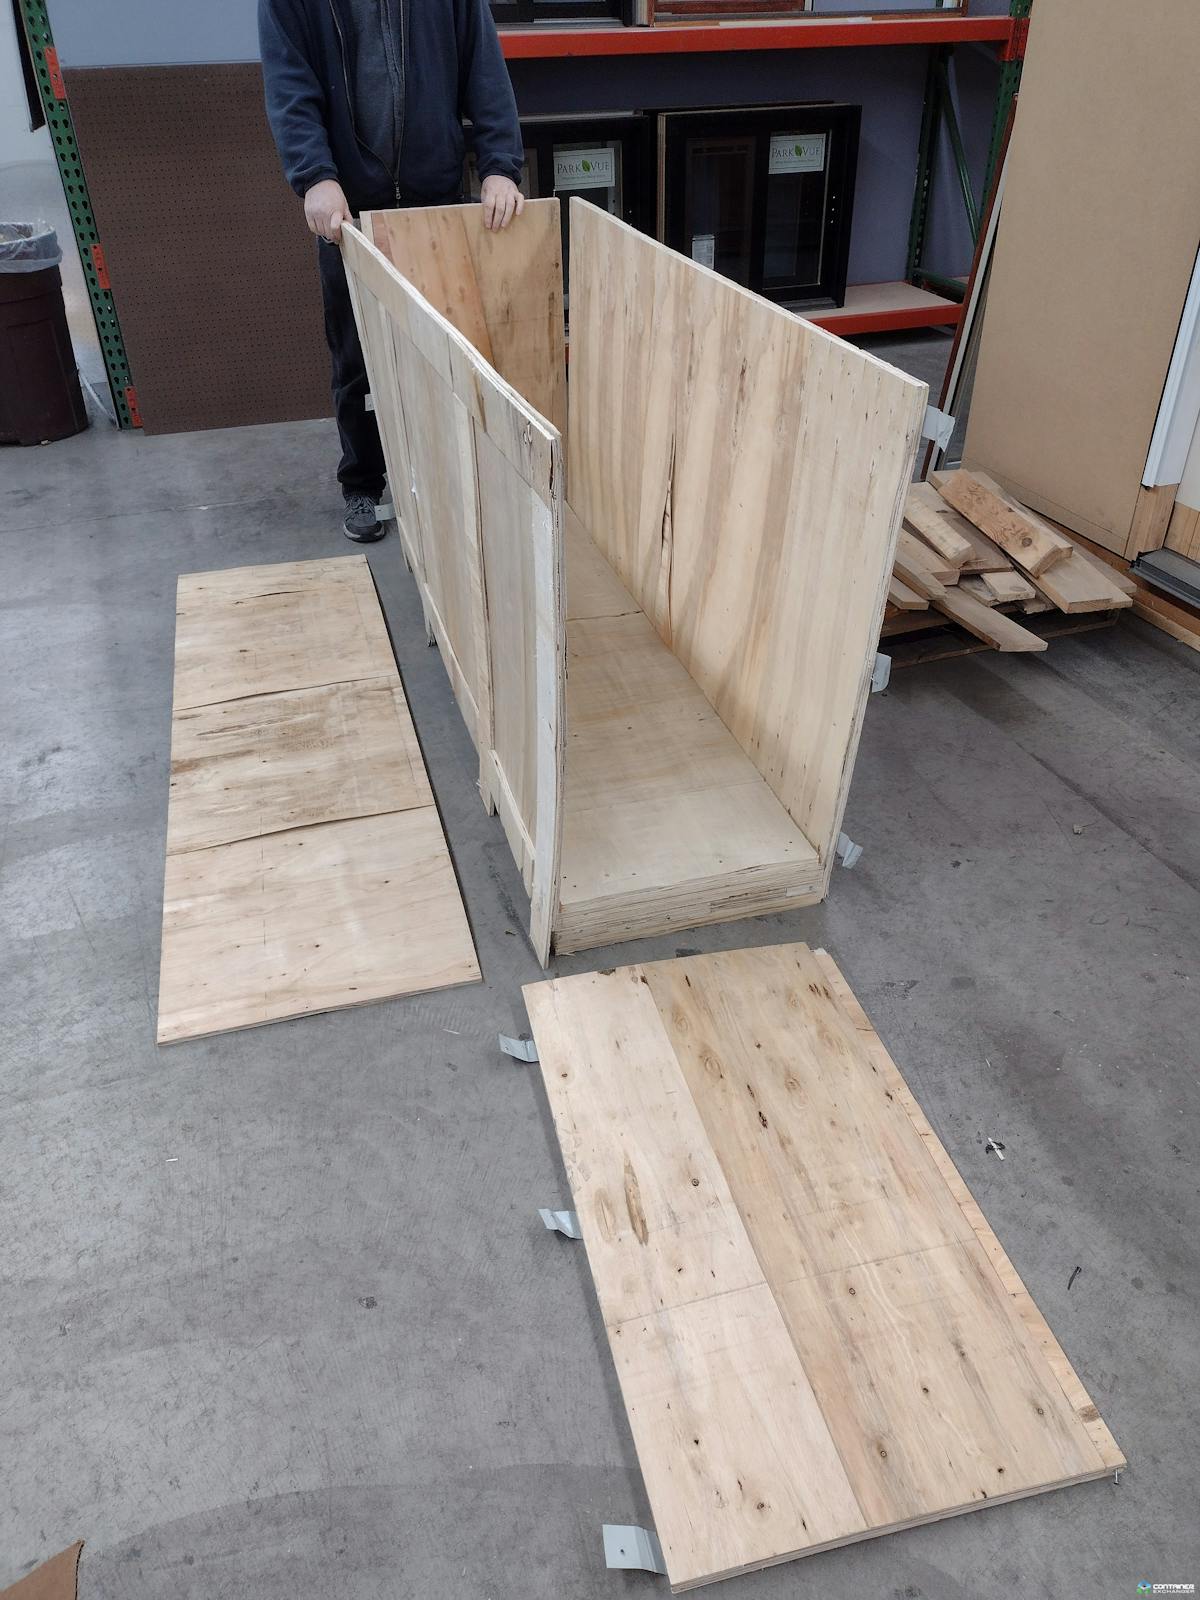 Wood Crates For Sale: Used 77.5x21.5x38 Heat treated Collapsible Plywood Crates Wisconsin In Wisconsin - image  2